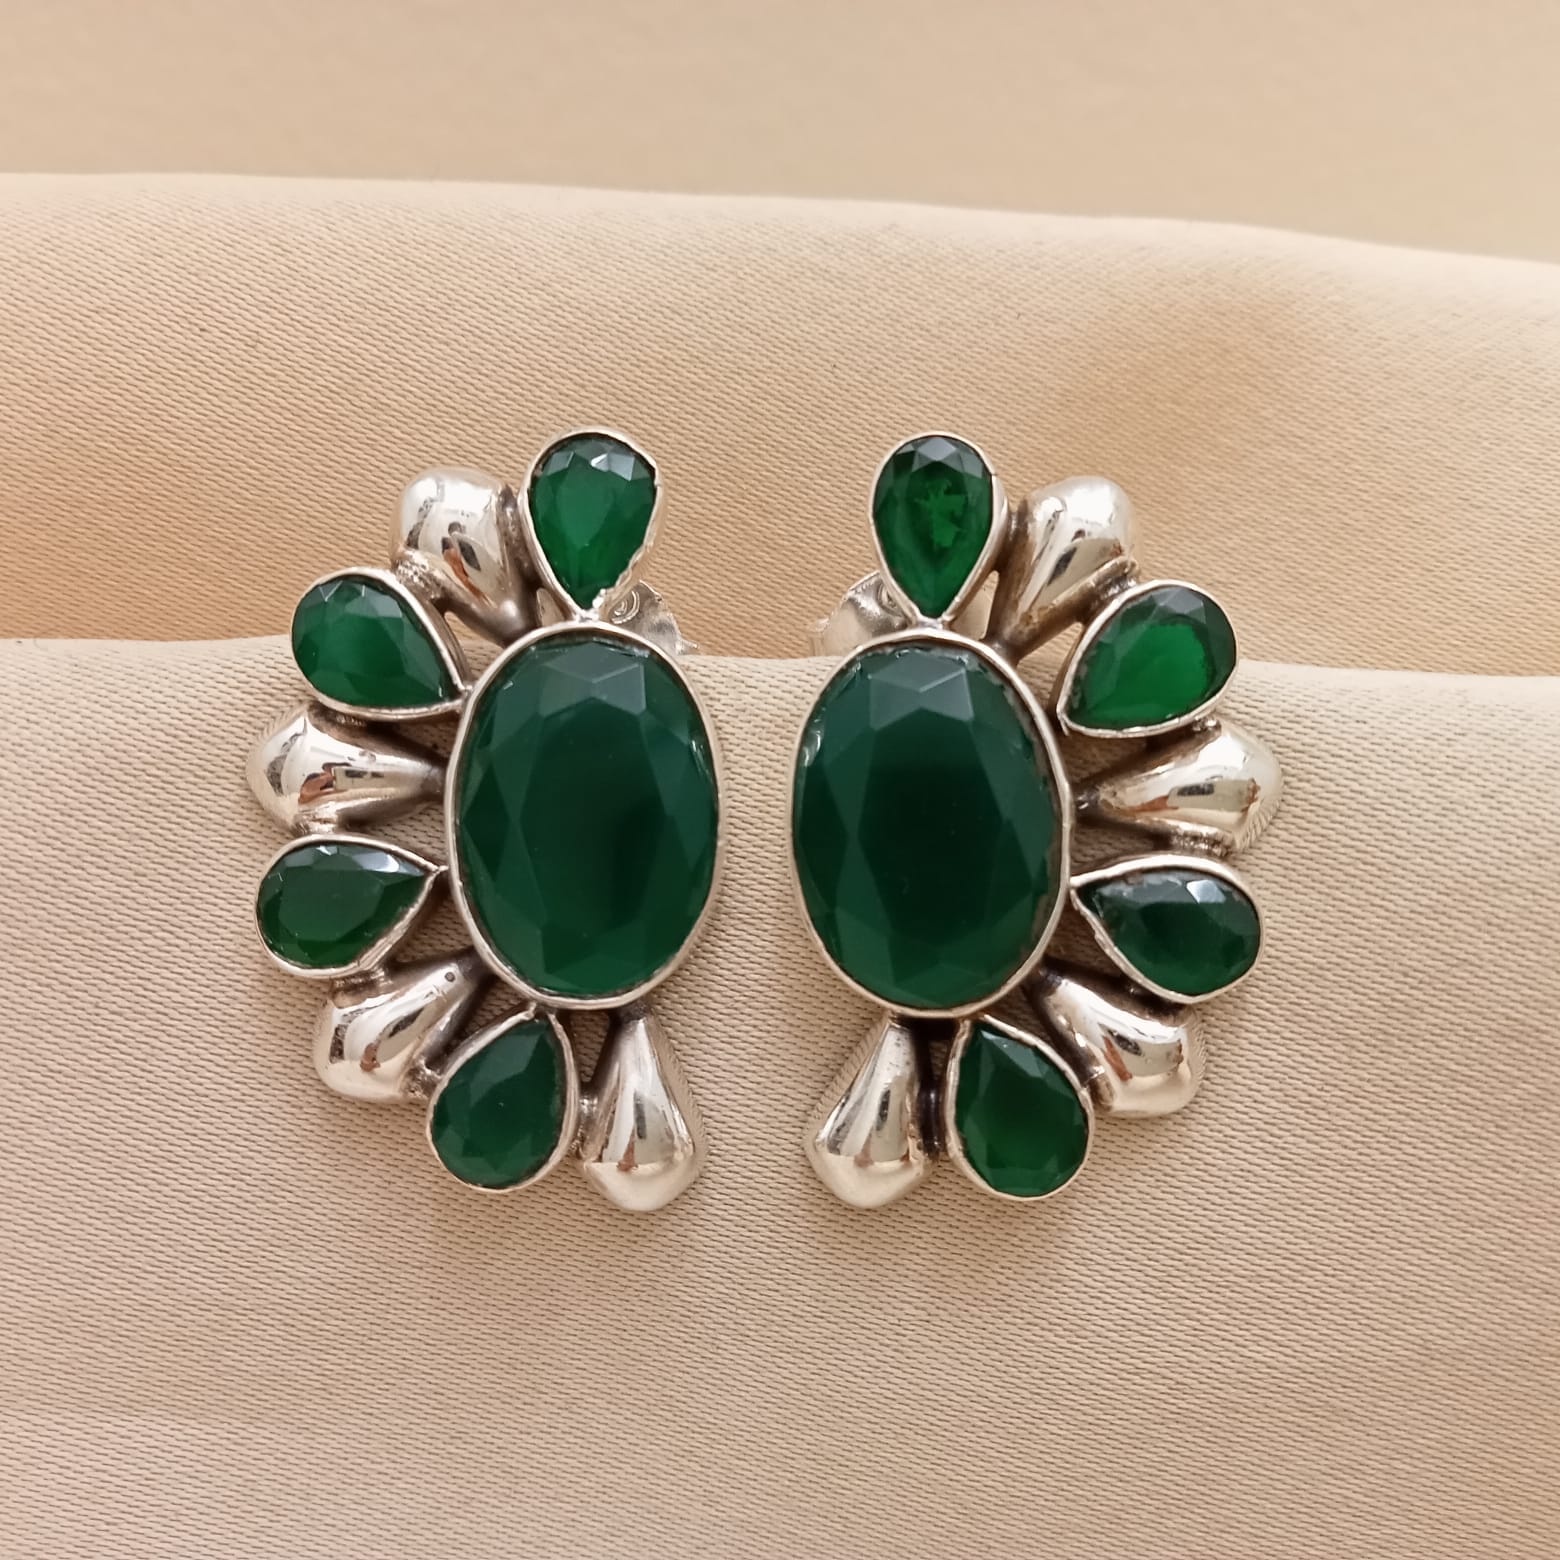 Bailey's Children's Collection May Birthstone Emerald Stud Earrings –  Bailey's Fine Jewelry